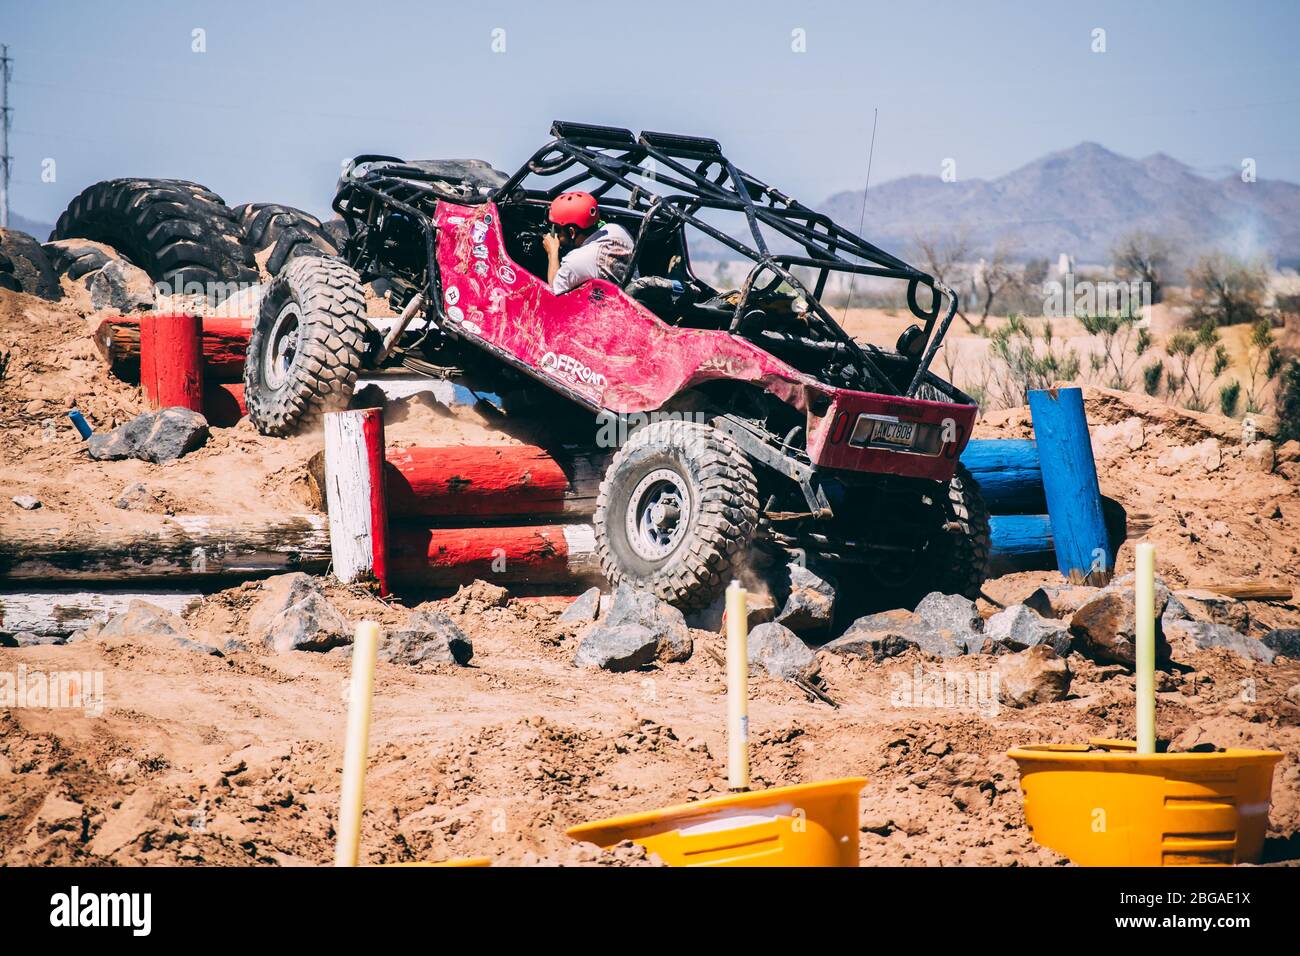 Off-road vehicles going through an obstacle cousre Stock Photo